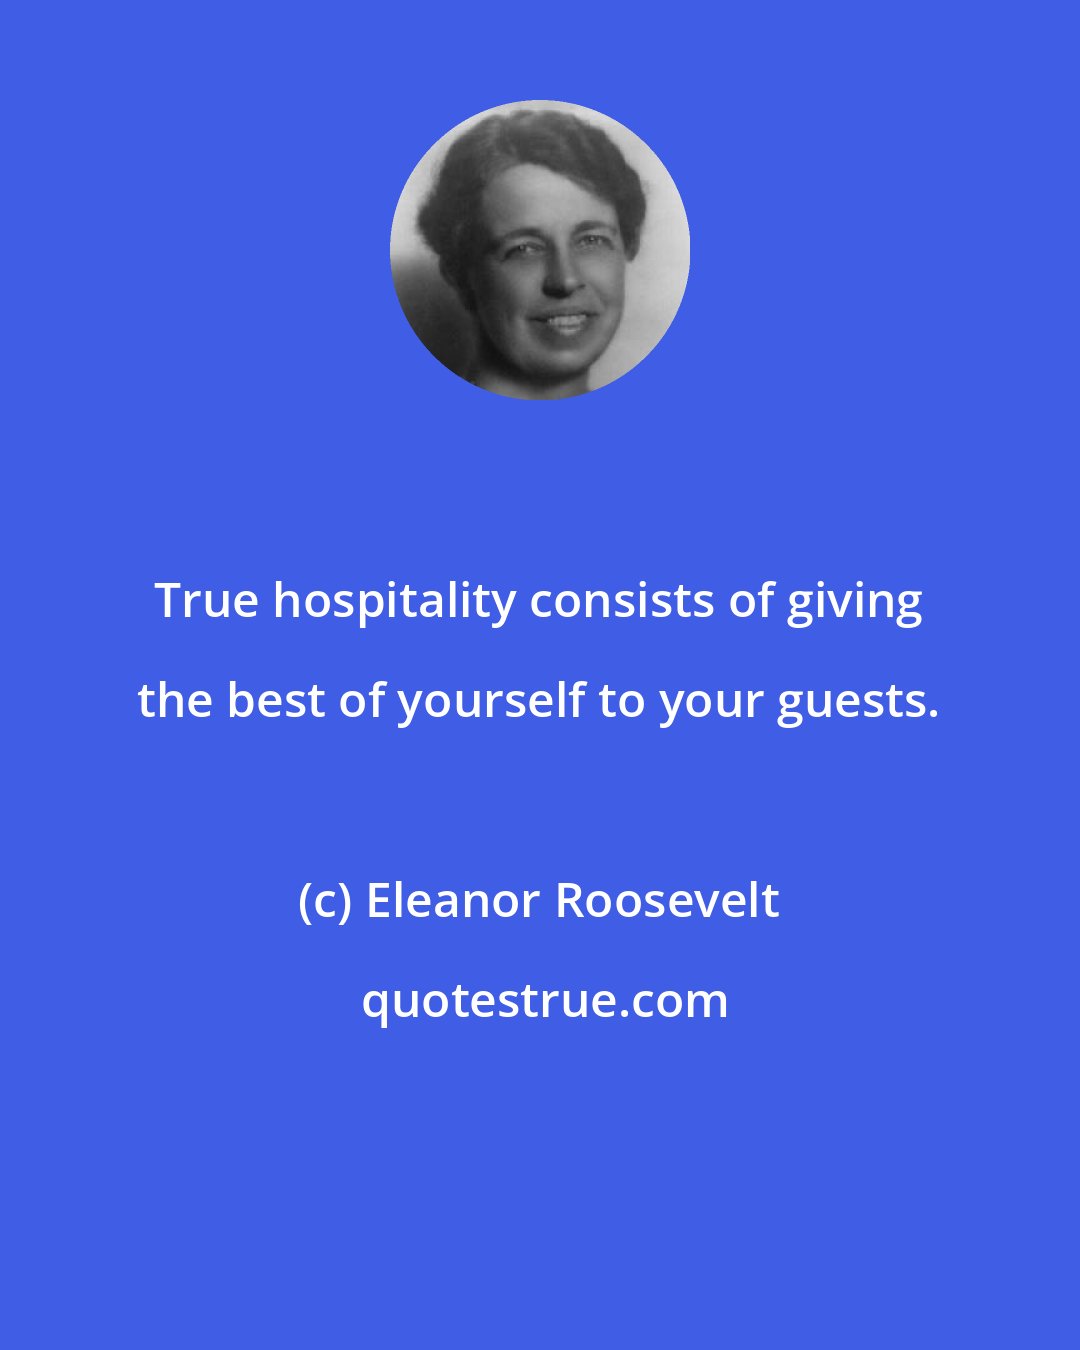 Eleanor Roosevelt: True hospitality consists of giving the best of yourself to your guests.